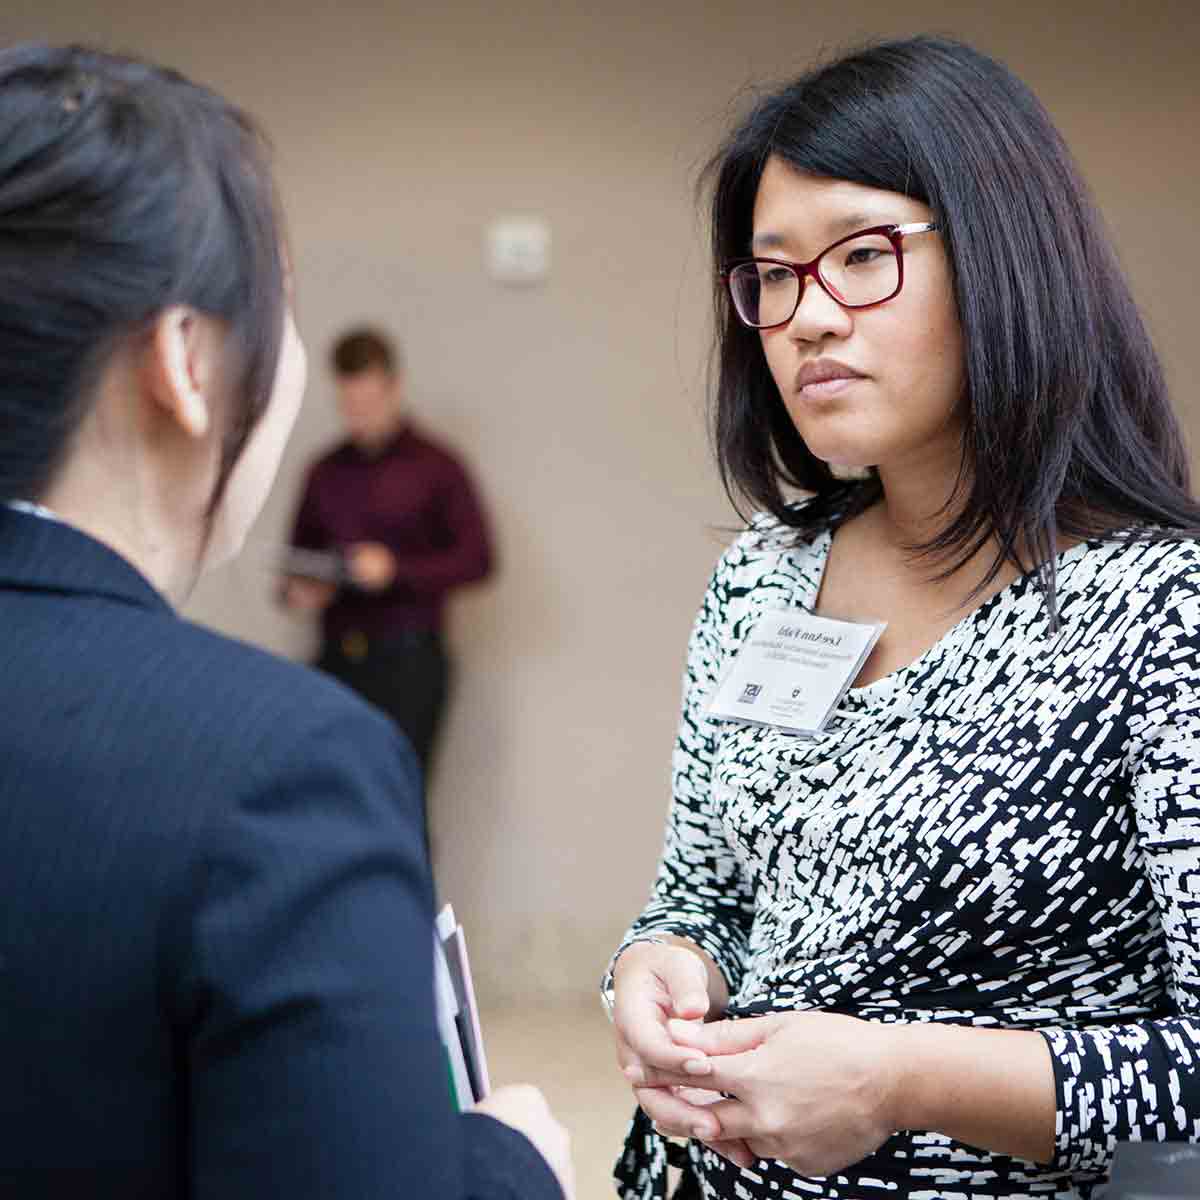 Employers interact with students and alumni at a University of St. Thomas career fair.